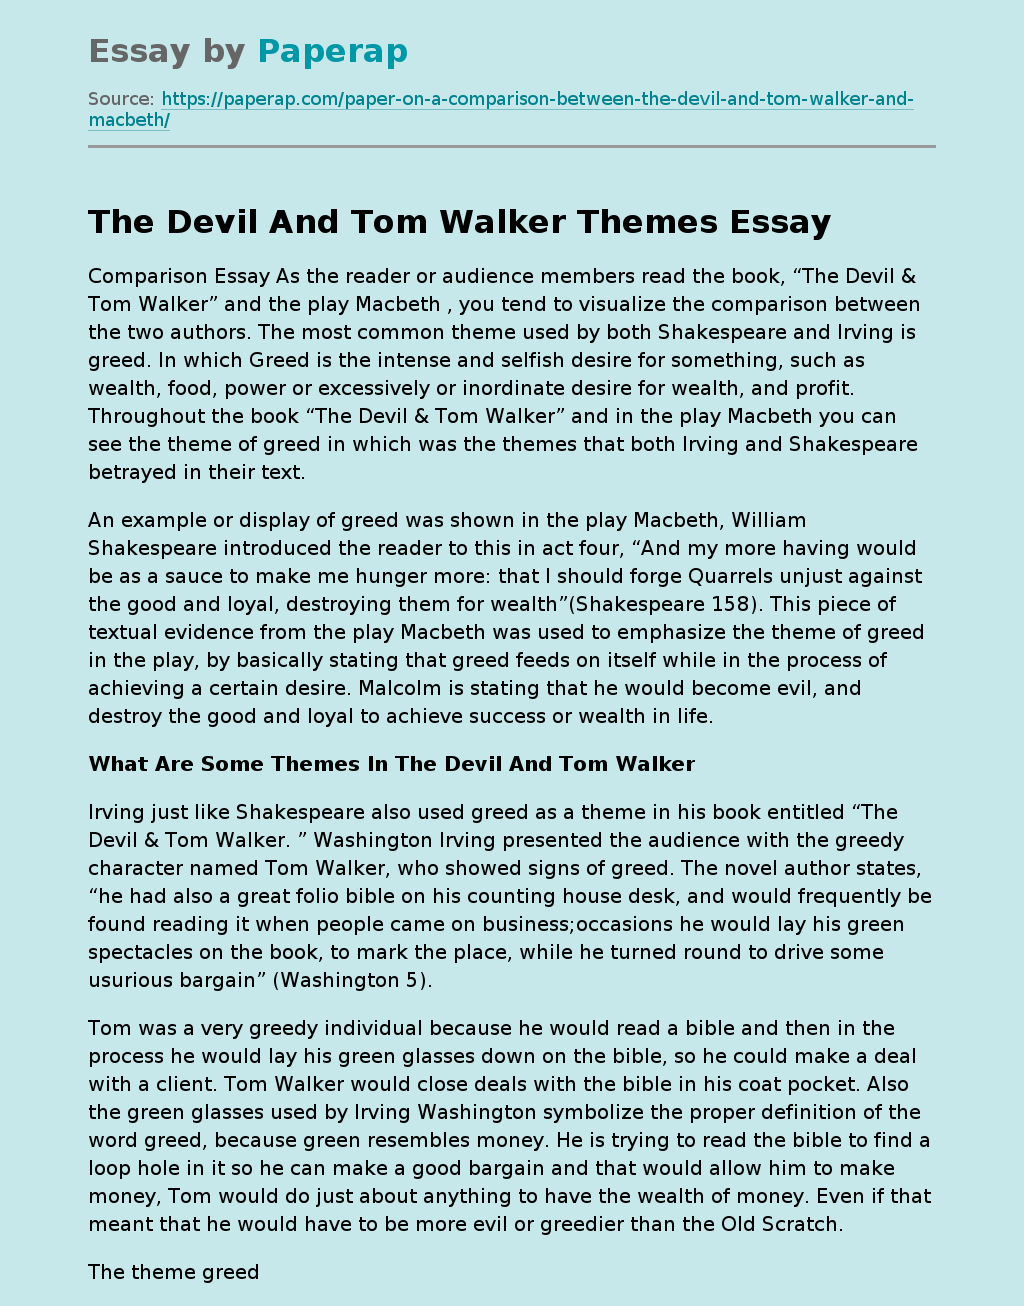 The Devil And Tom Walker Themes